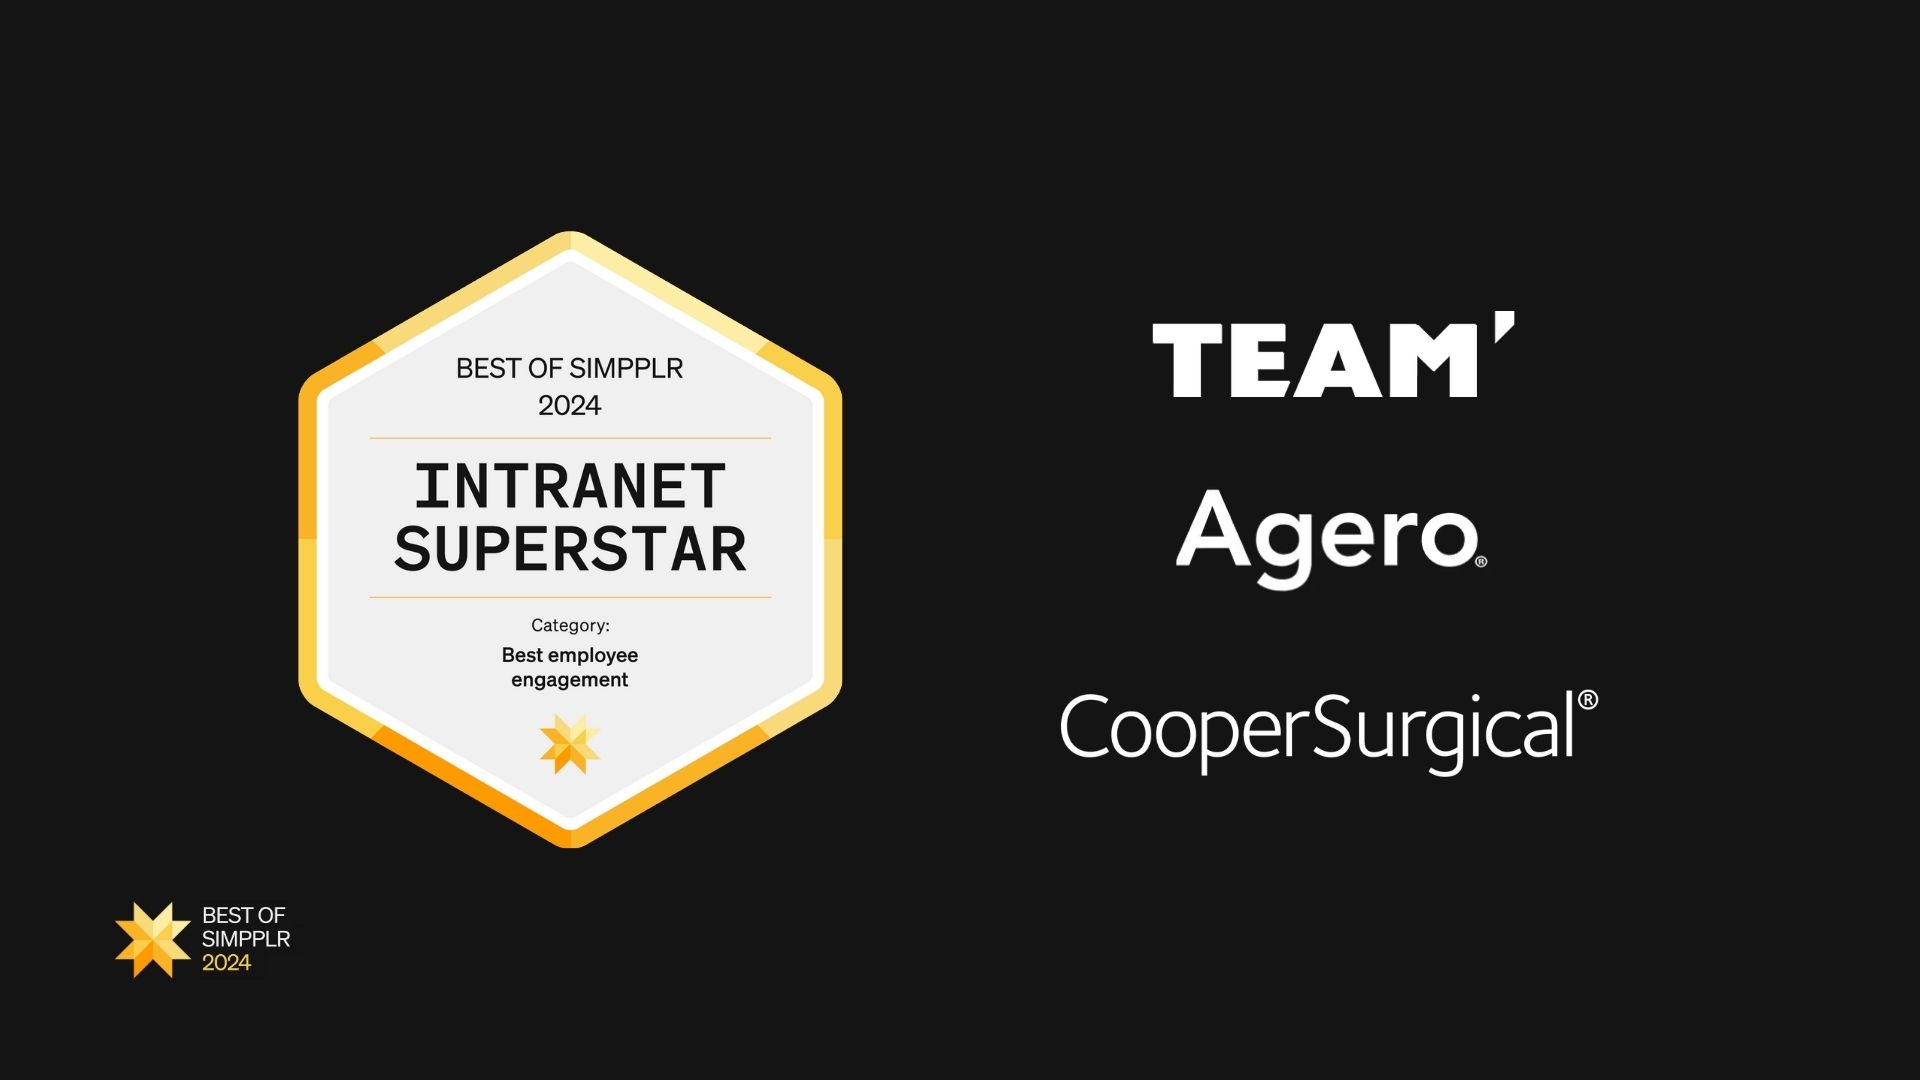 Best of Simpplr 2024 intranet contest winners - Best employee engagement winners: Agero, CooperSurgical, TEAM Marketing